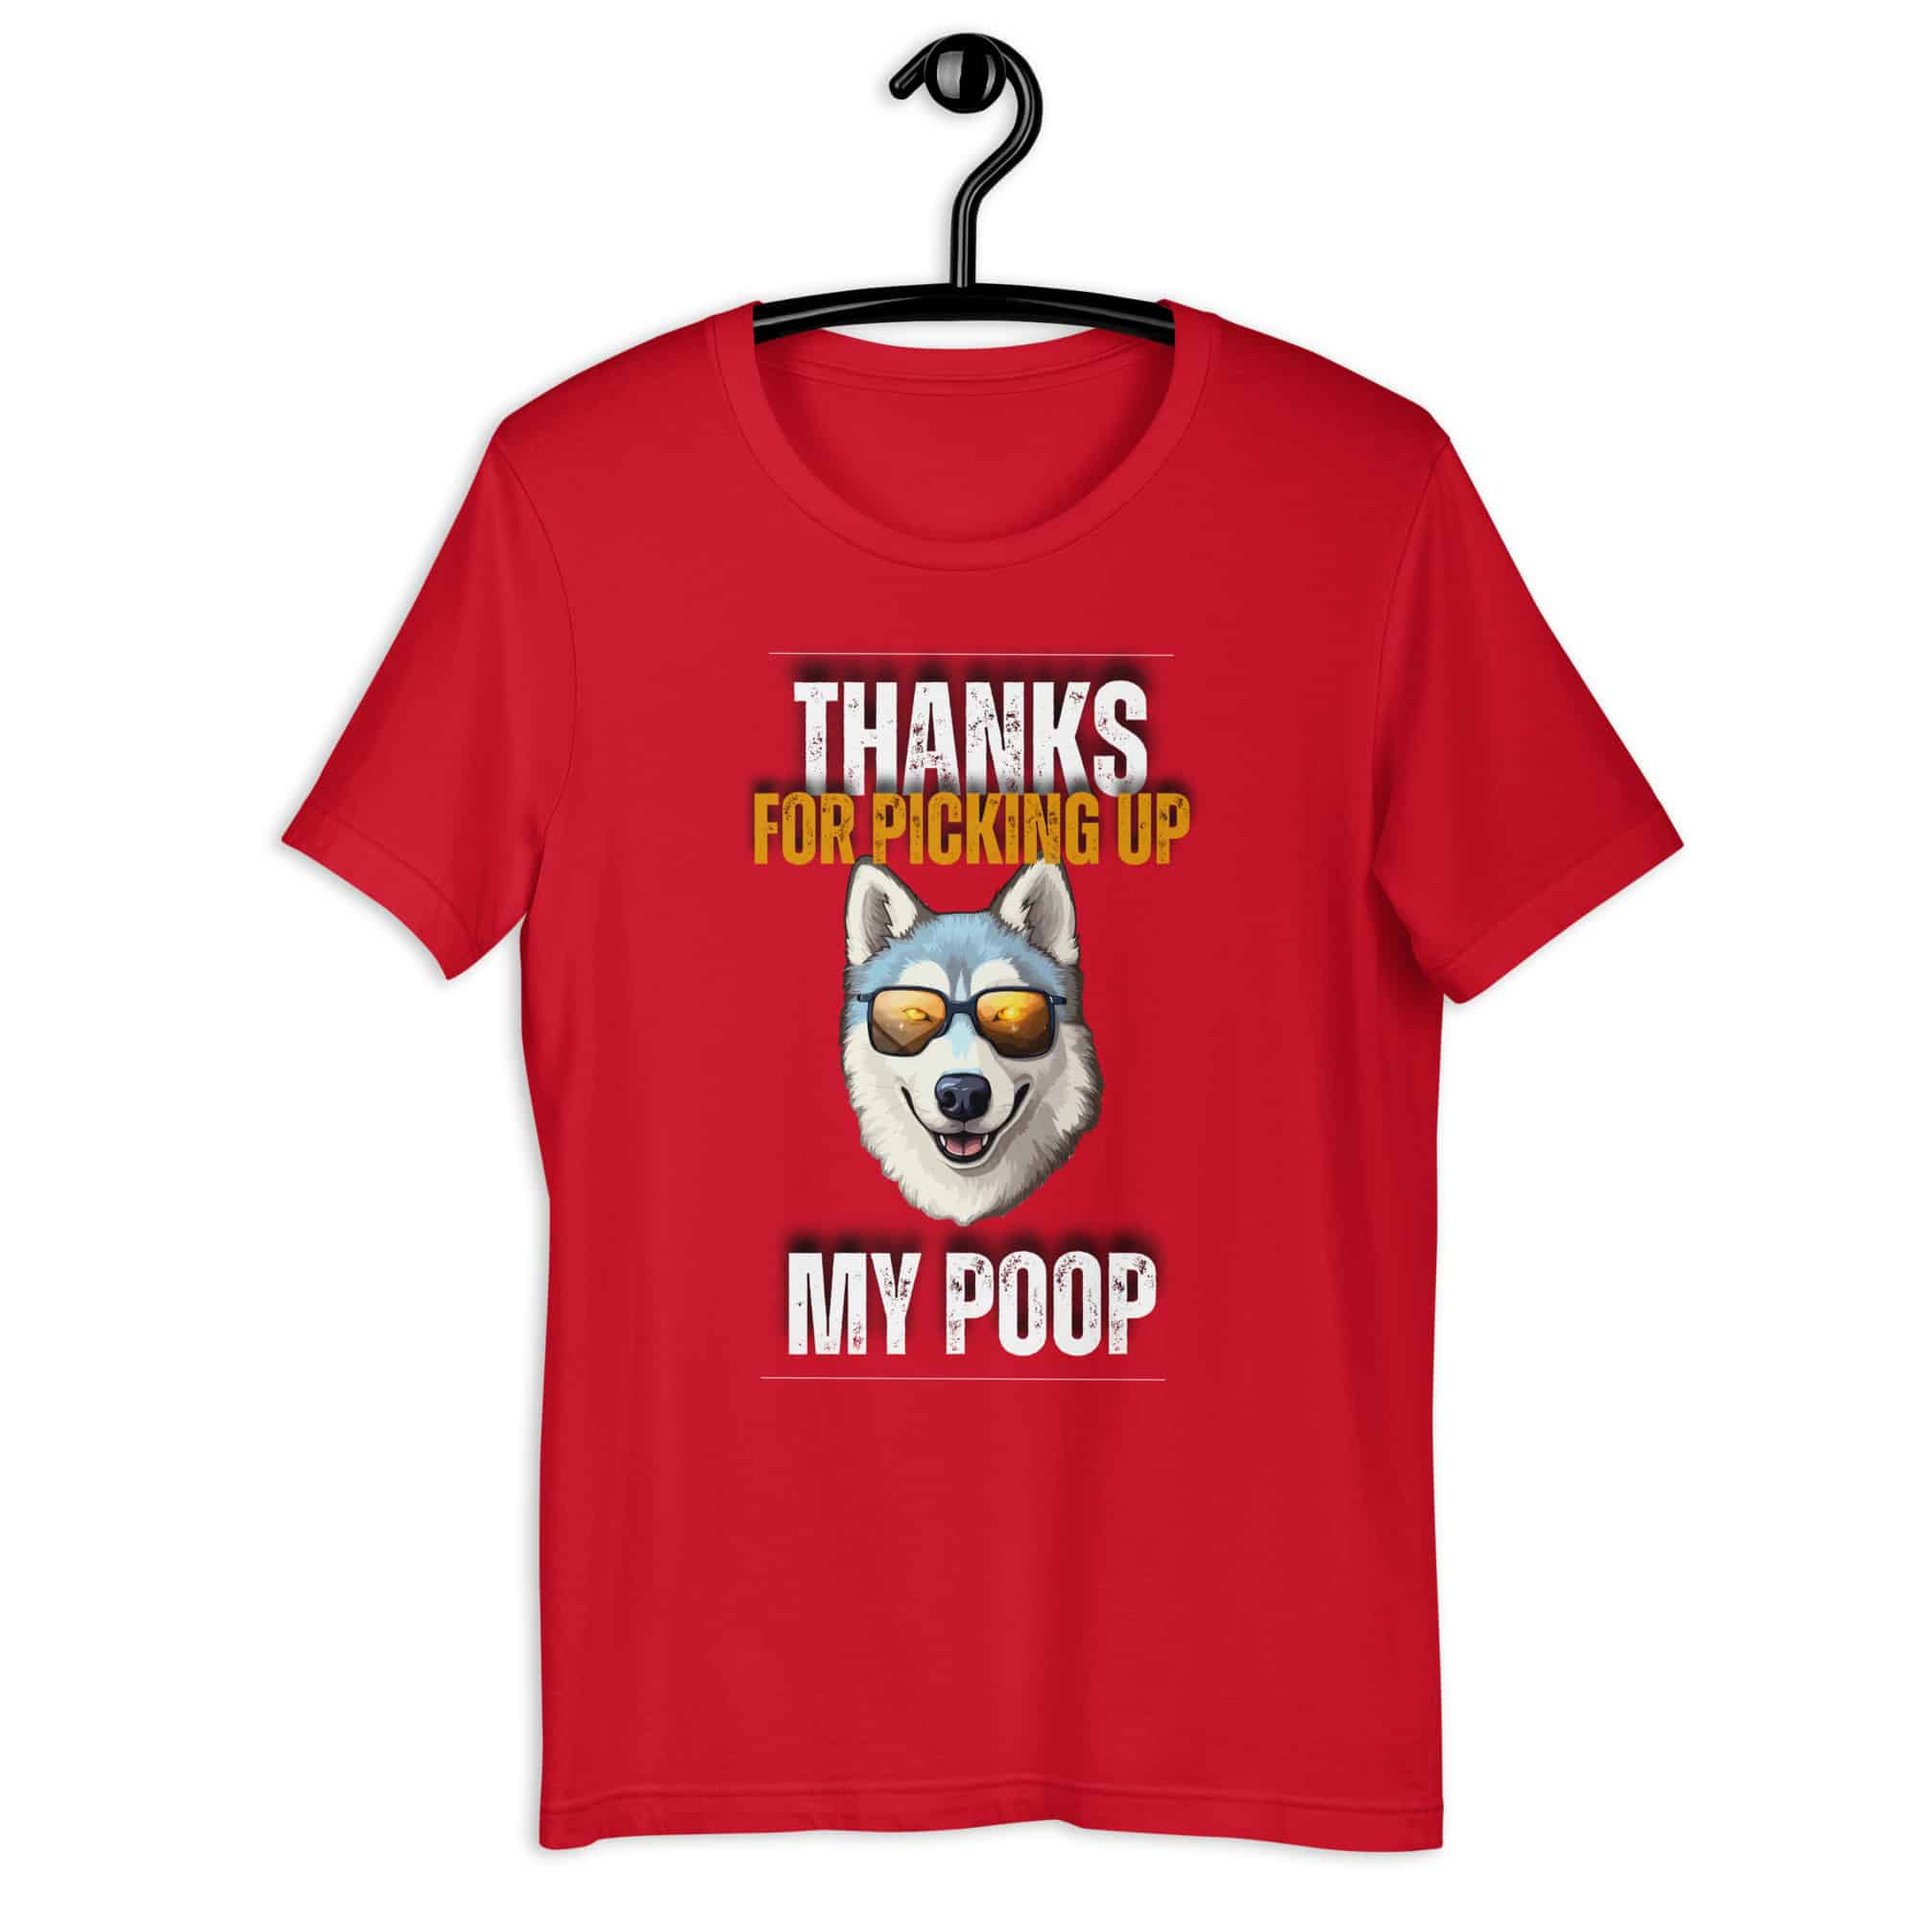 Thanks For Picking Up My POOP Funny Huskies Unisex T-Shirt. Red